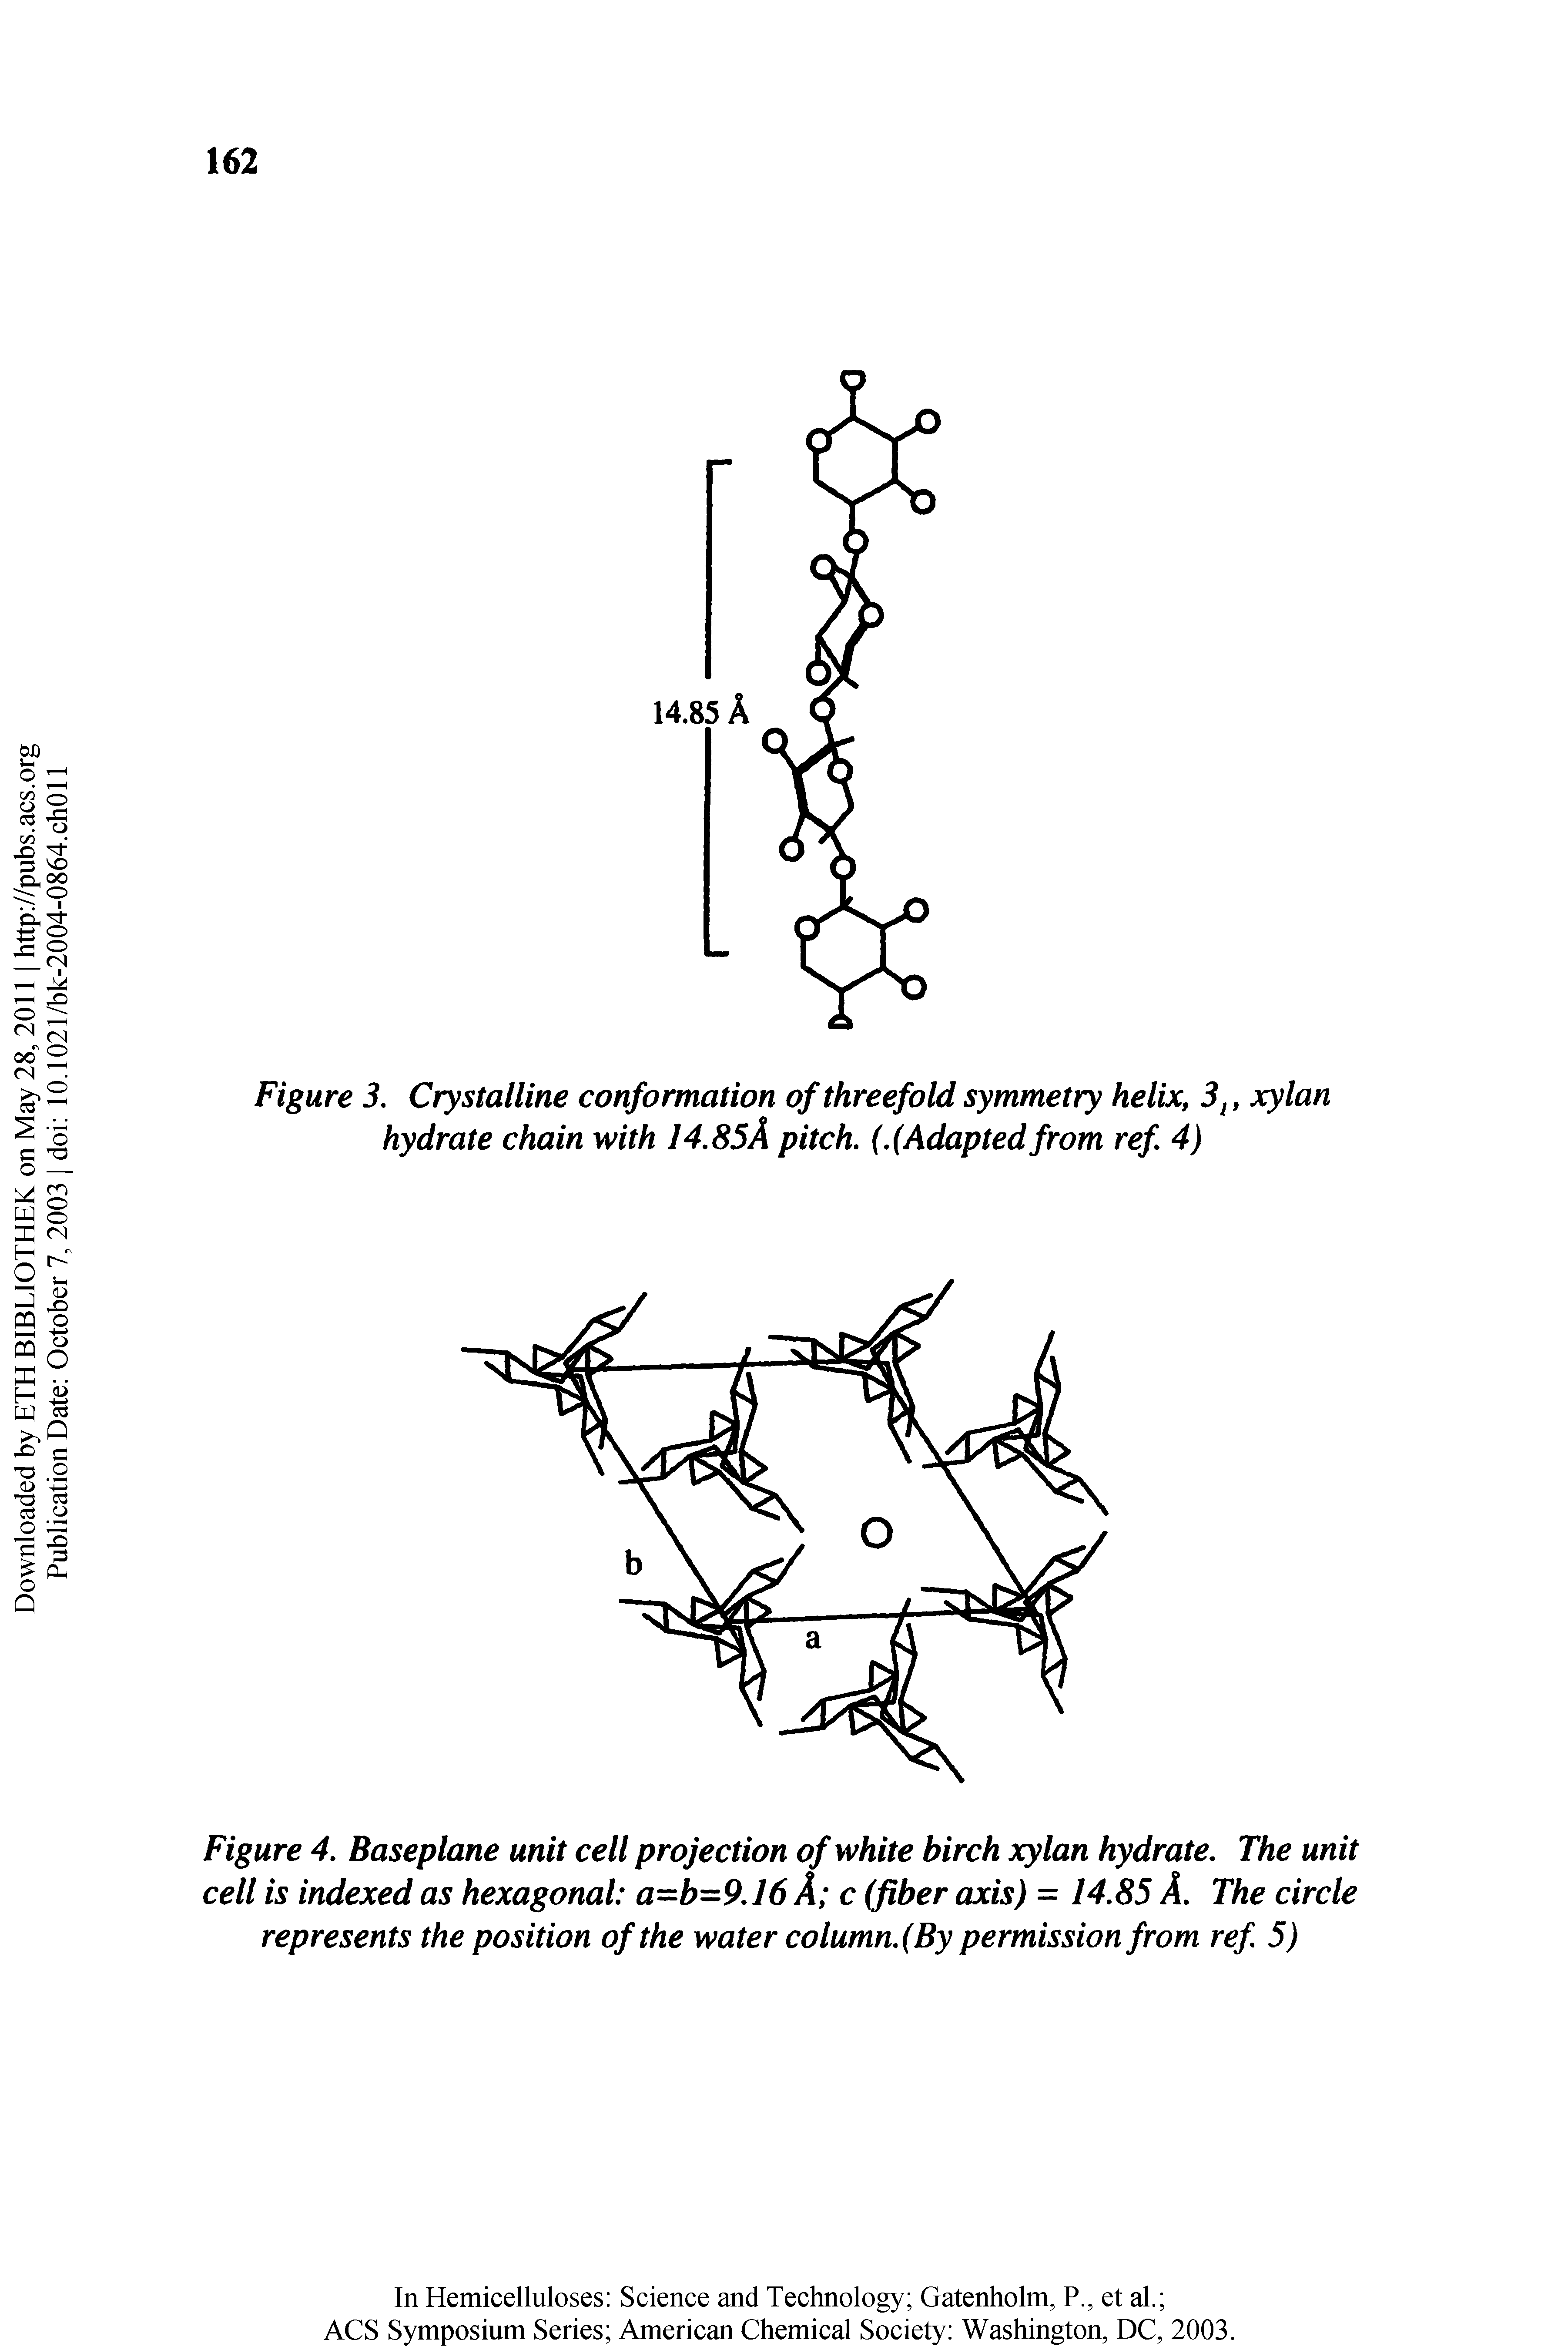 Figure 3, Crystalline conformation of threefold symmetry helix, 3, xylan hydrate chain with J4.85A pitch. (.(Adapted from ref 4)...